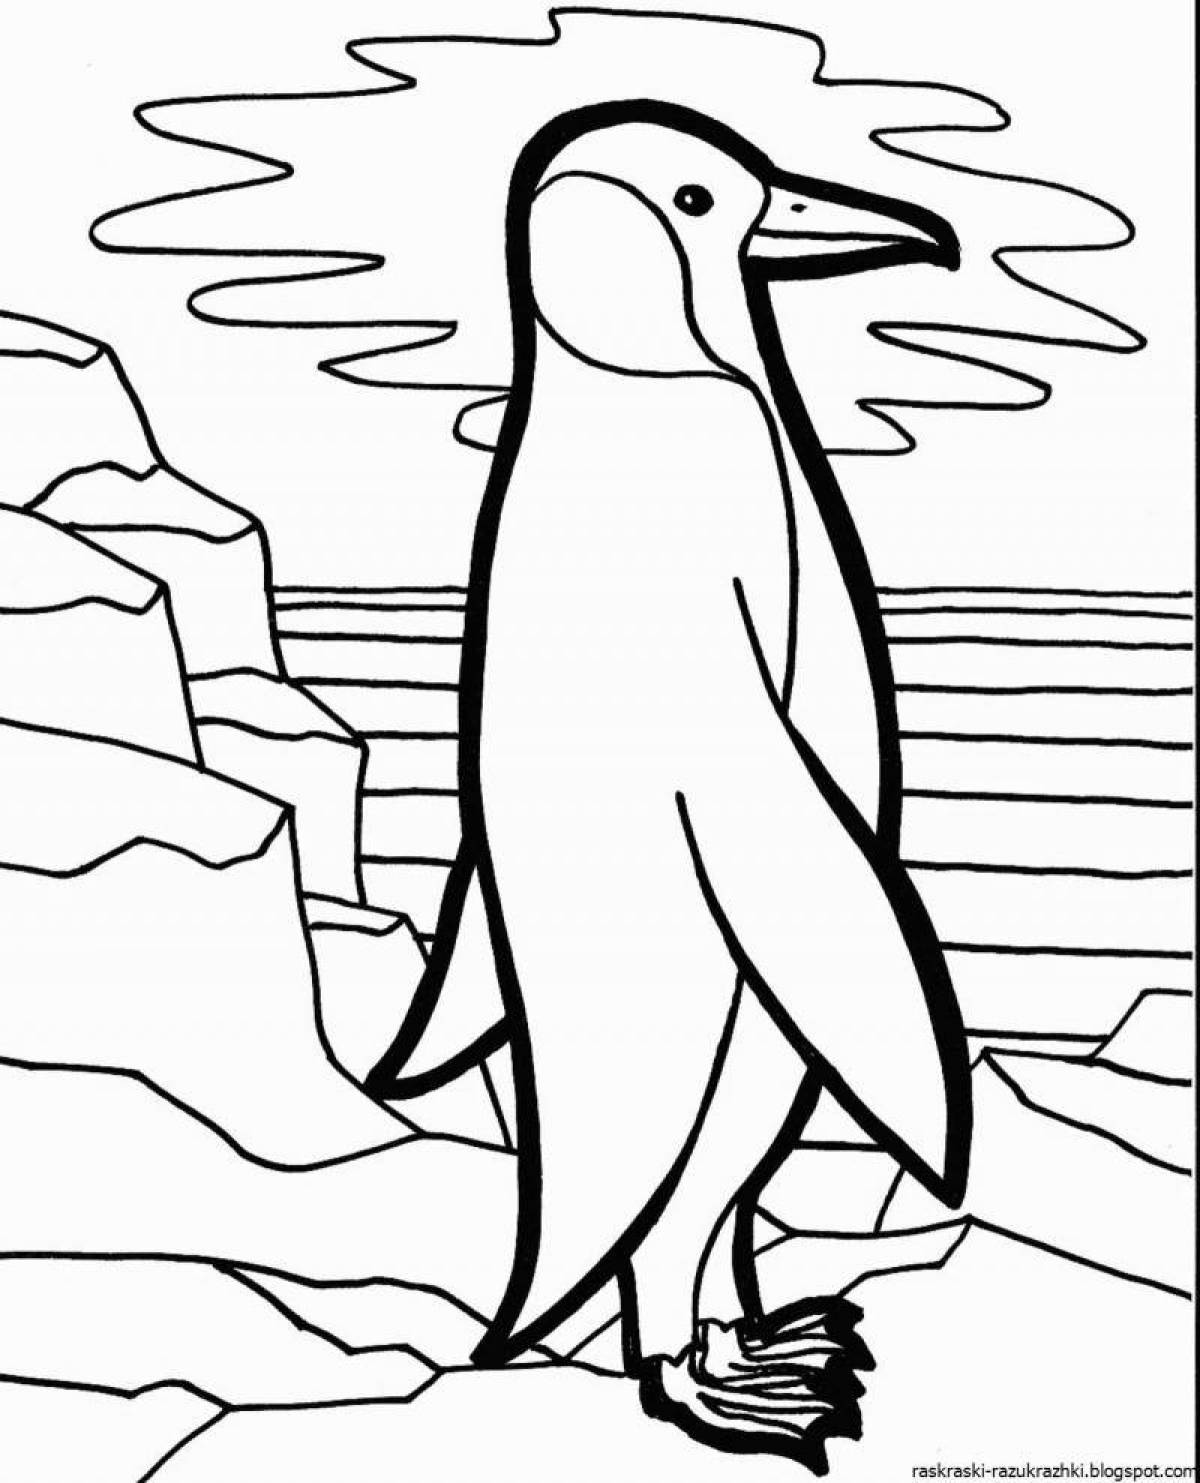 Adorable penguin drawing